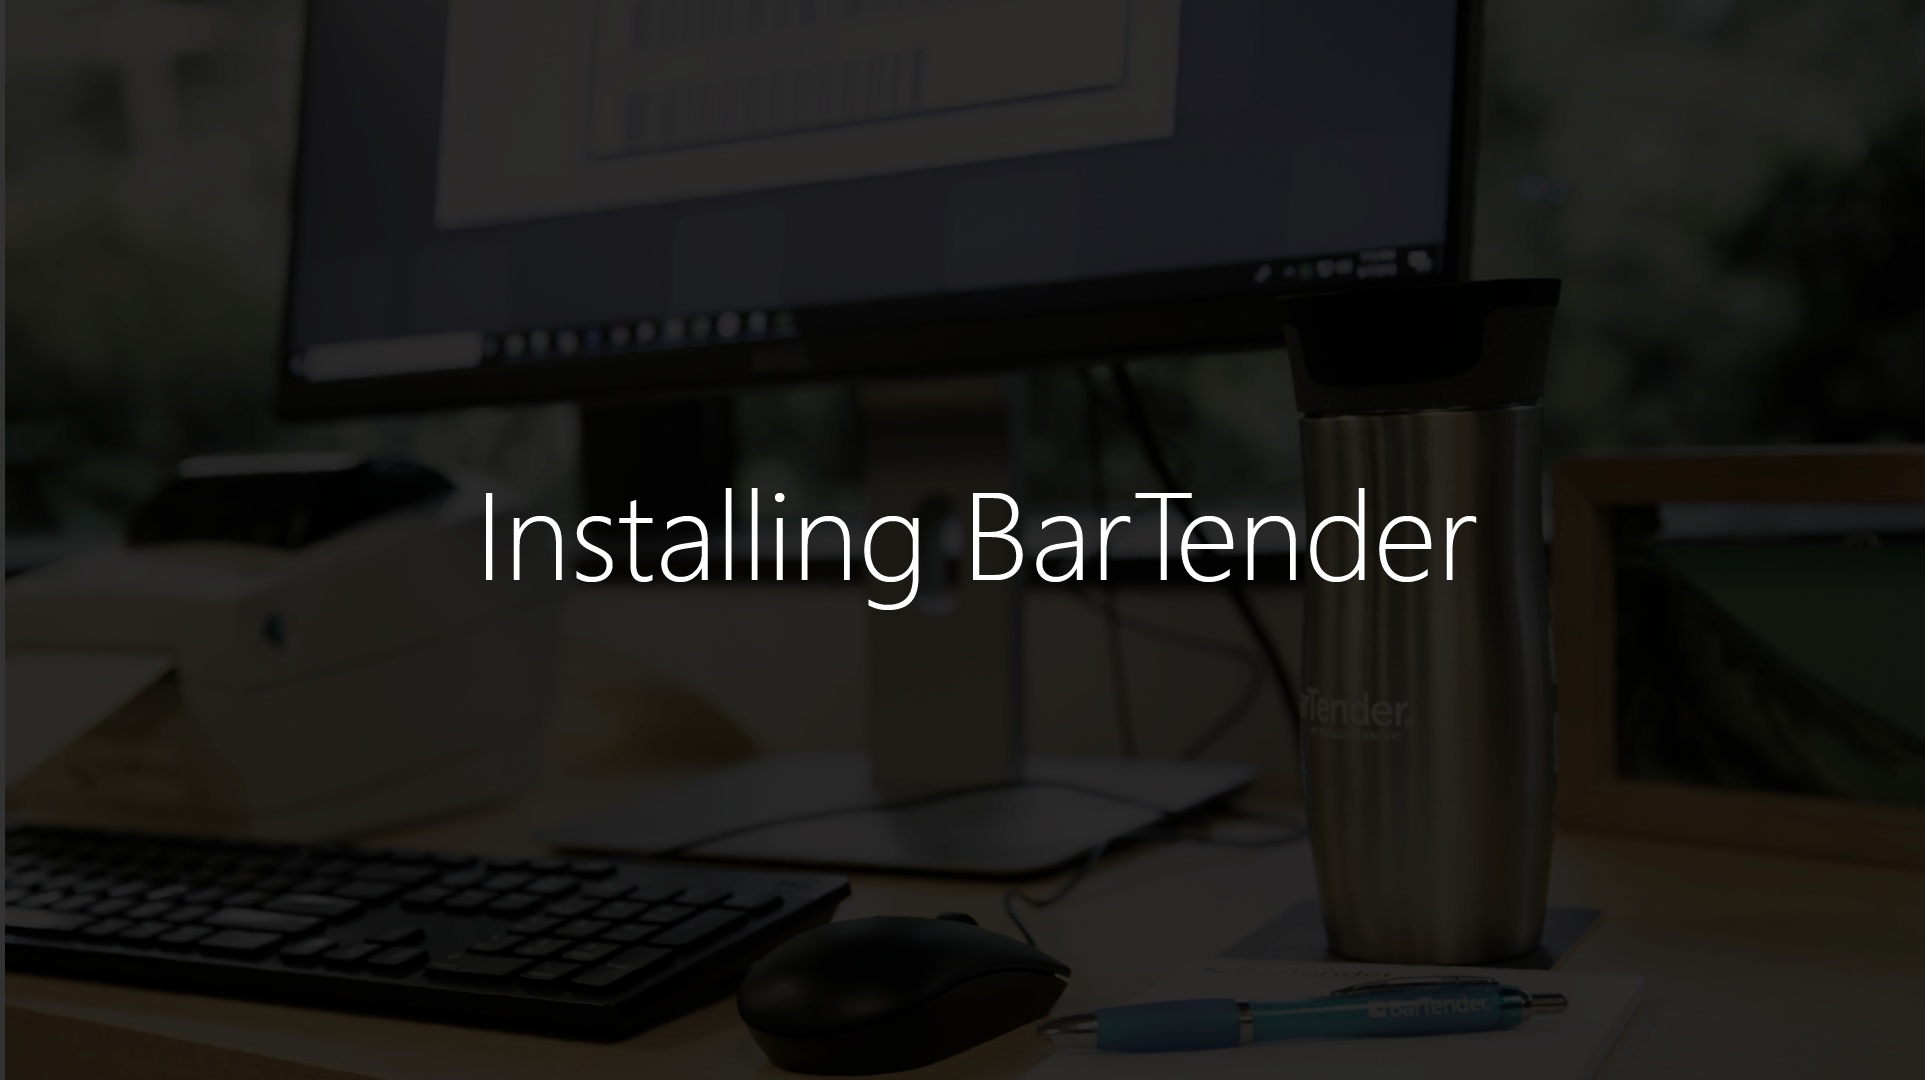 bartender 4 is capturing your screen